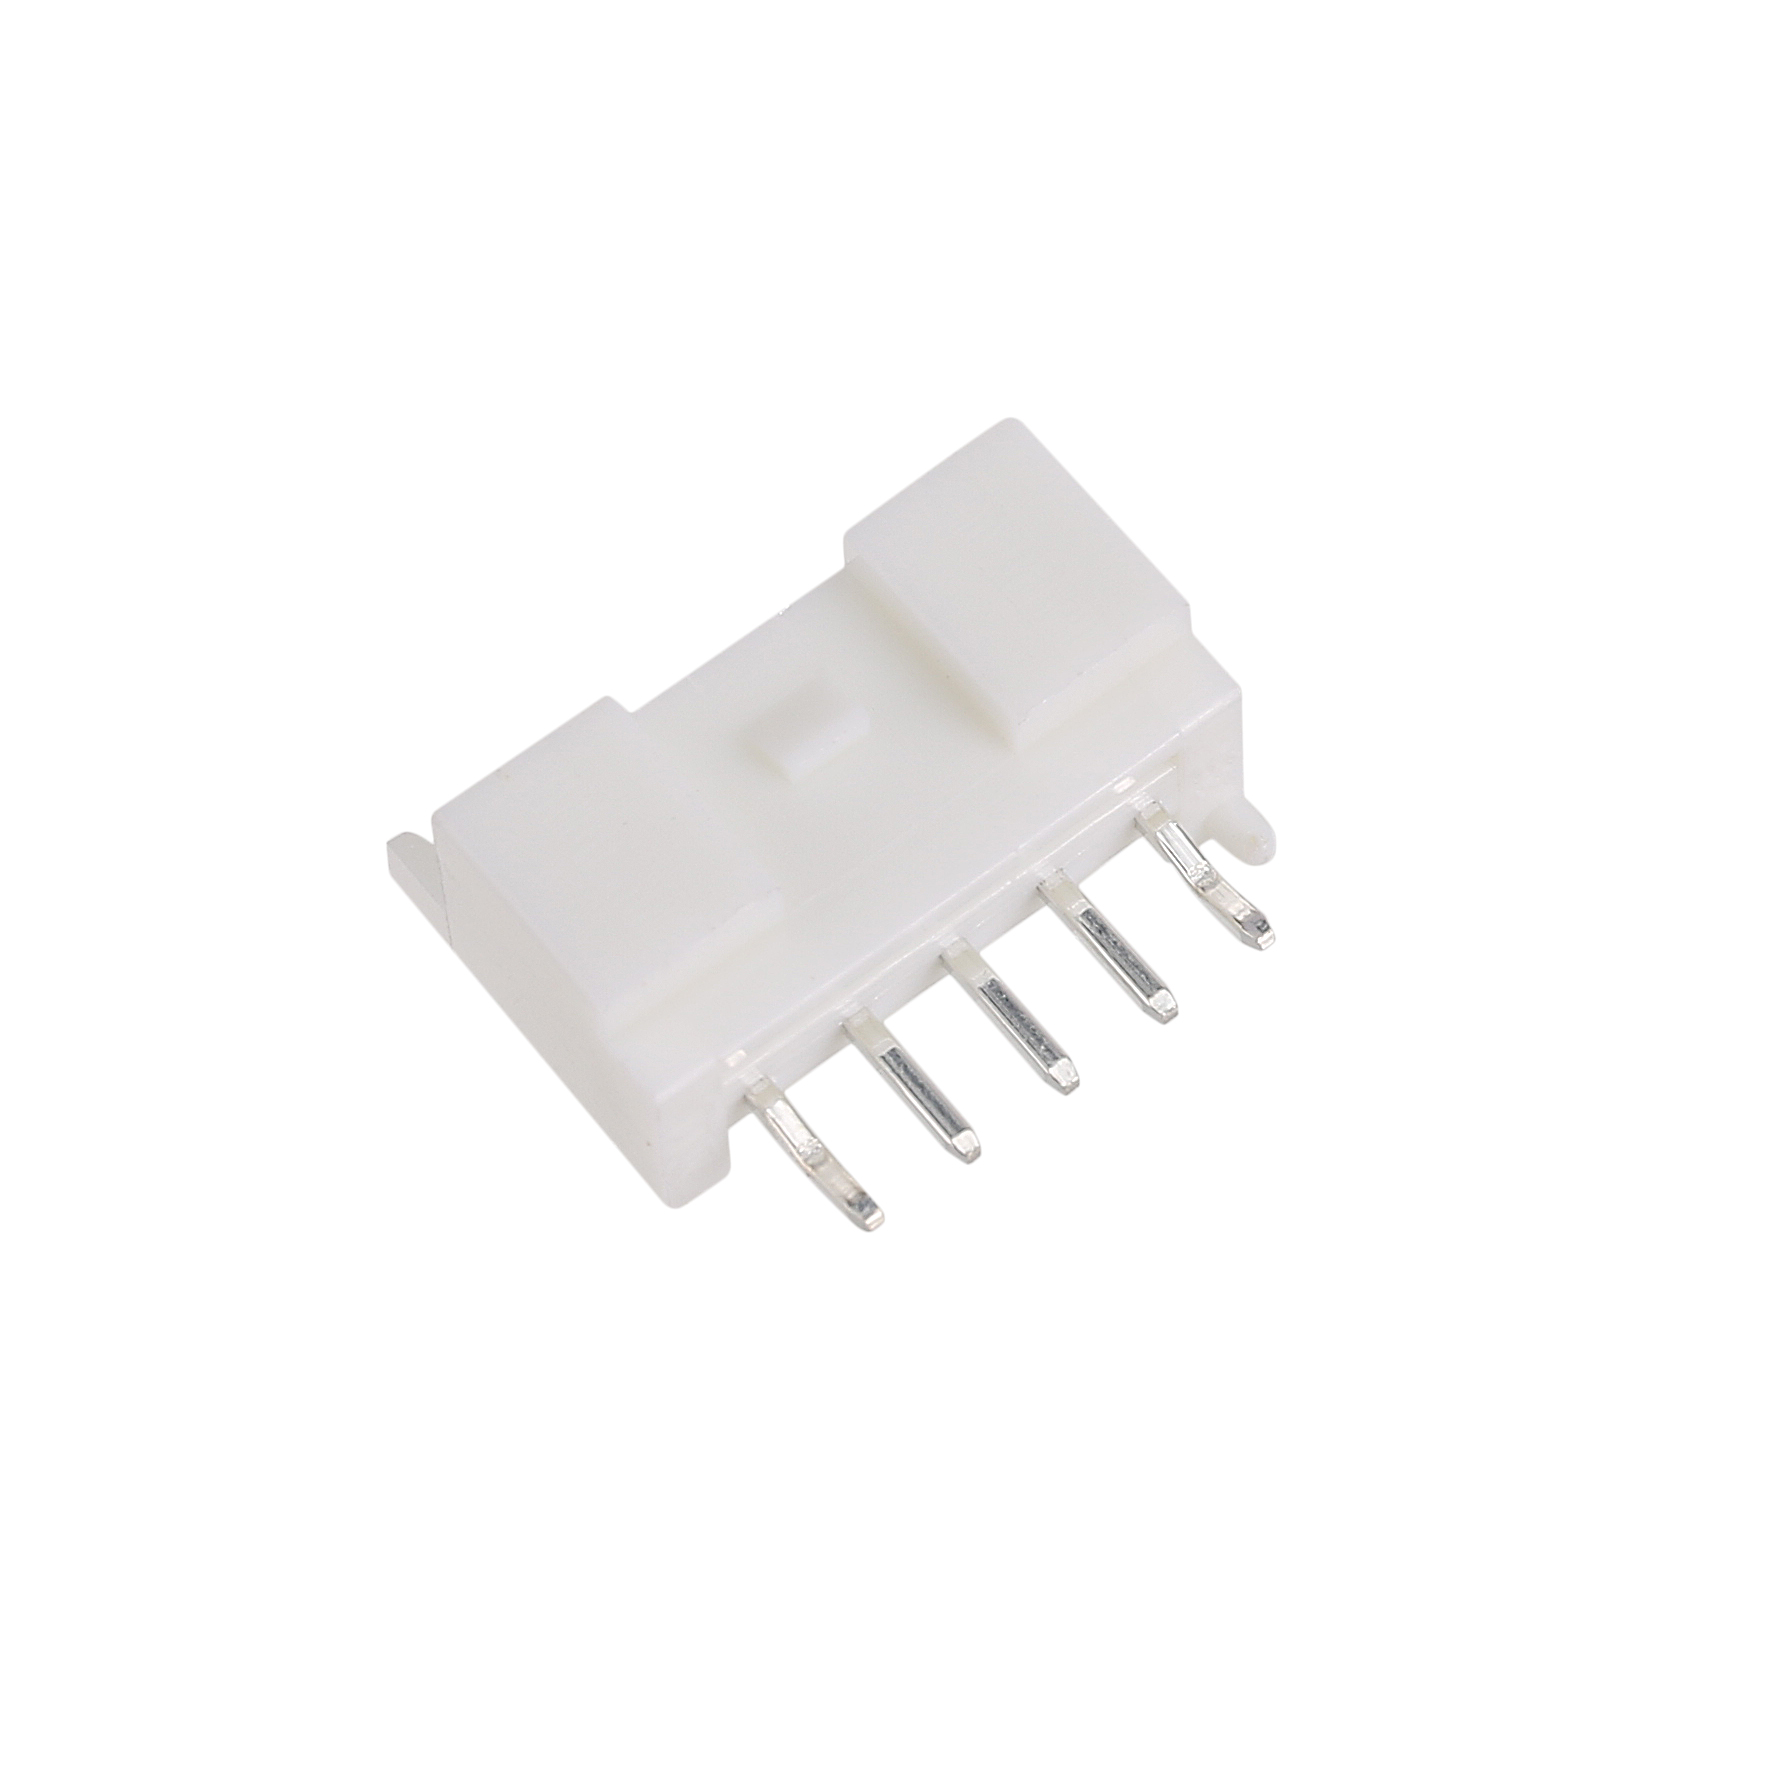 Cheapest JST connector manufacturers